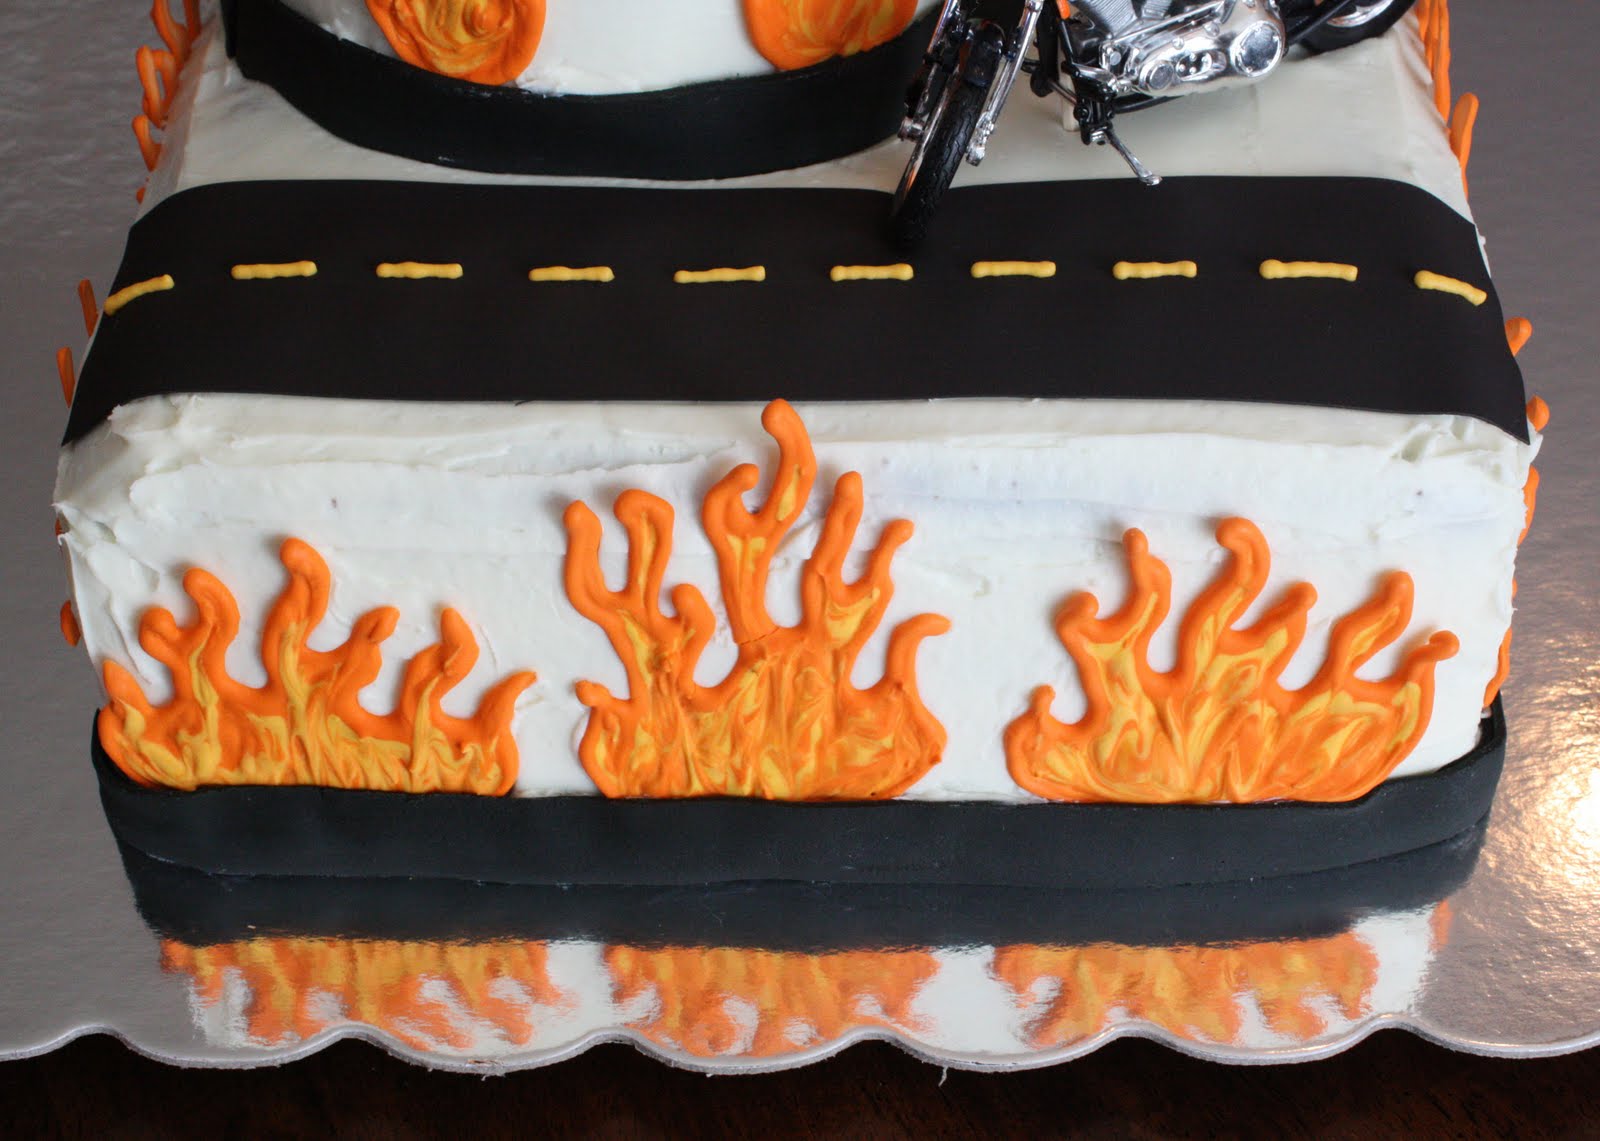 harley davidson logo with flames Fondant road and toy Harley